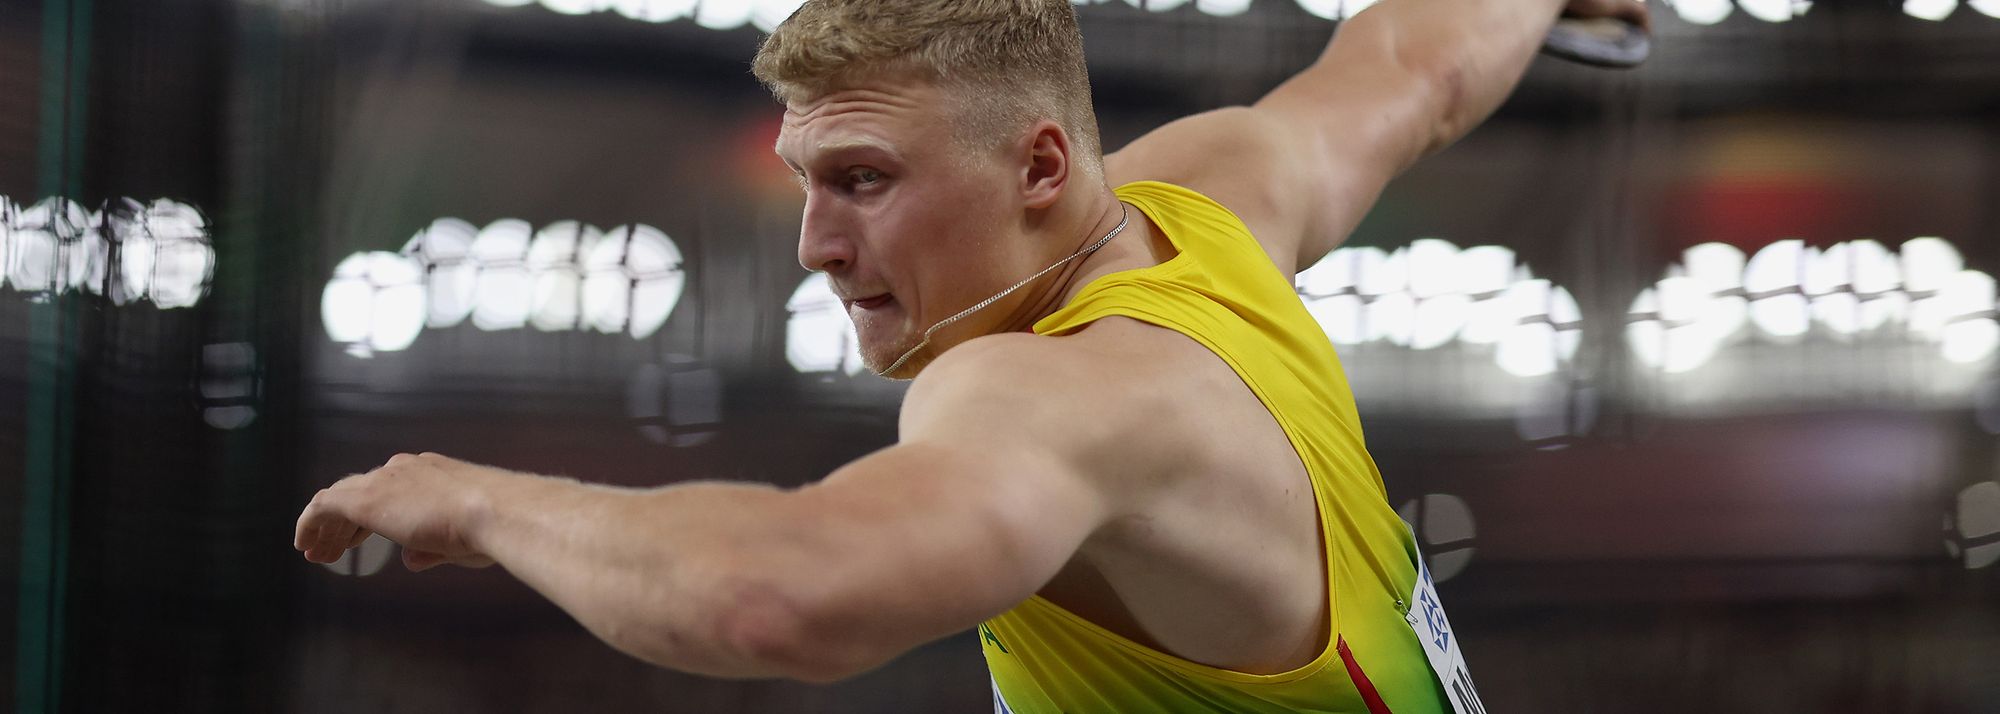 Lithuania’s Mykolas Alekna broke the longest standing men's world record, throwing an incredible 74.35m* to smash the discus mark at the Oklahoma Throws Series meeting in Ramona